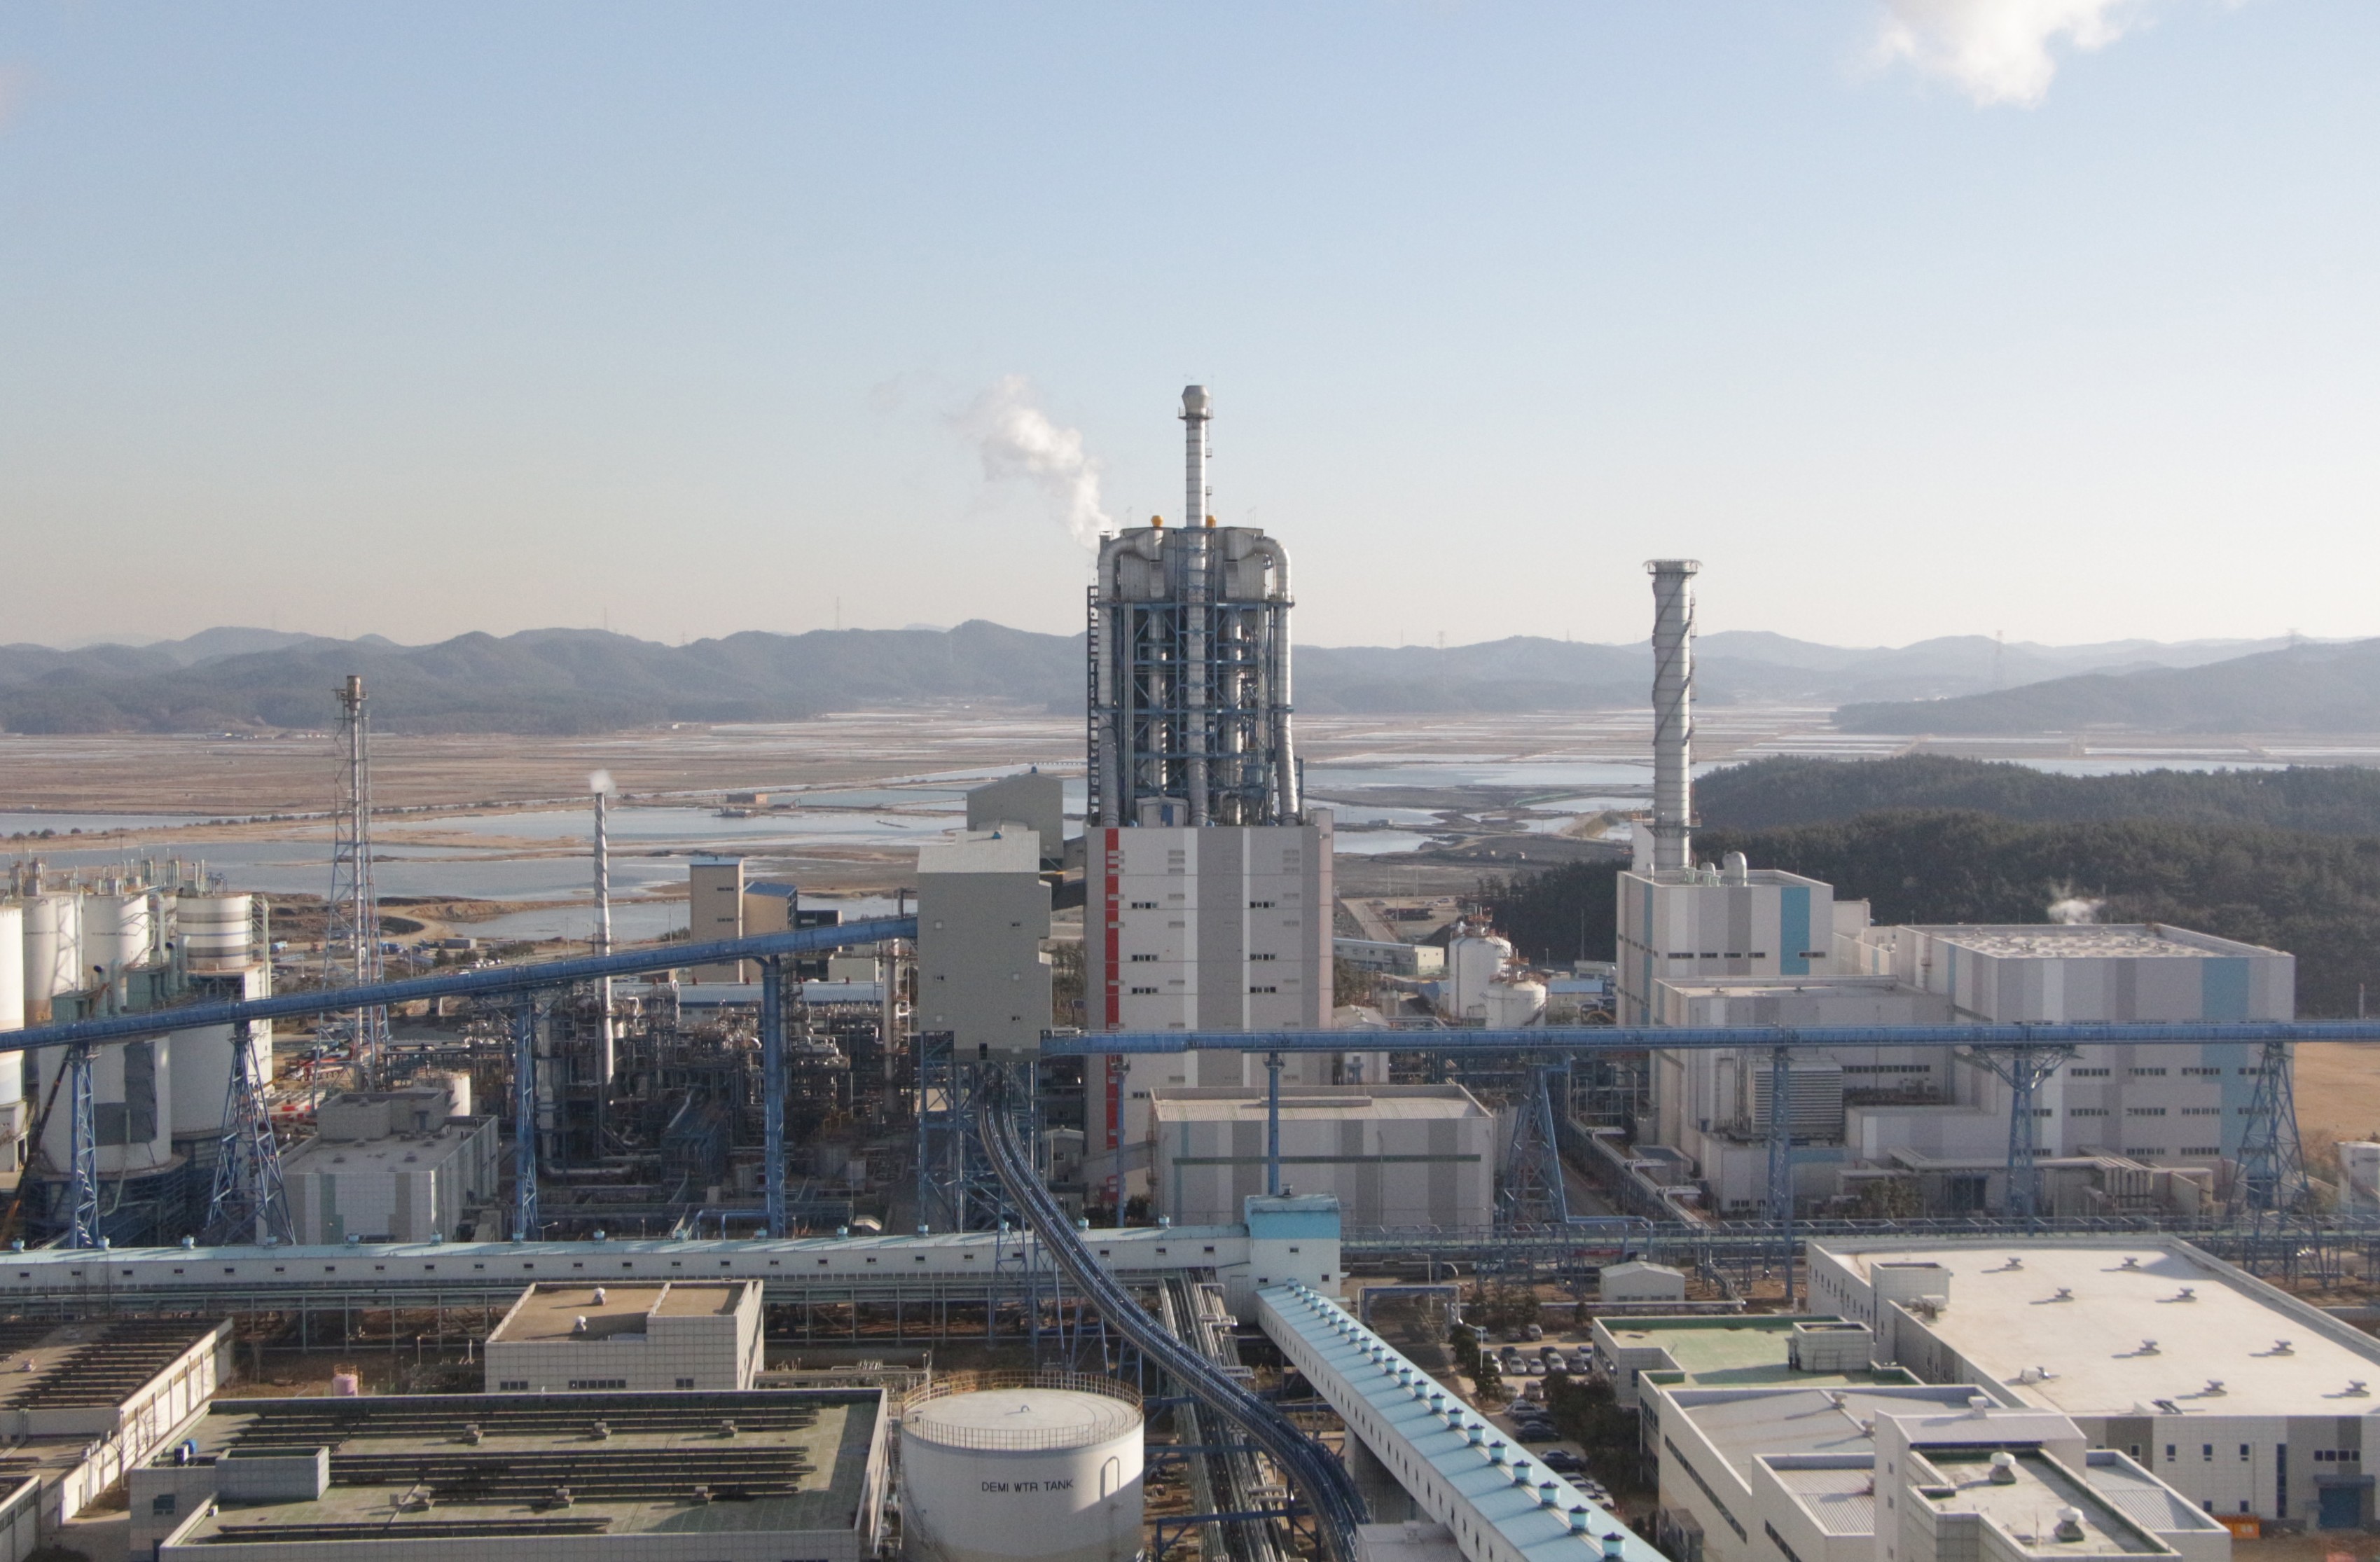 Korea Western Power’s Taean thermal power complex, which is being transformed into a renewable multi-purpose power-generating facility.